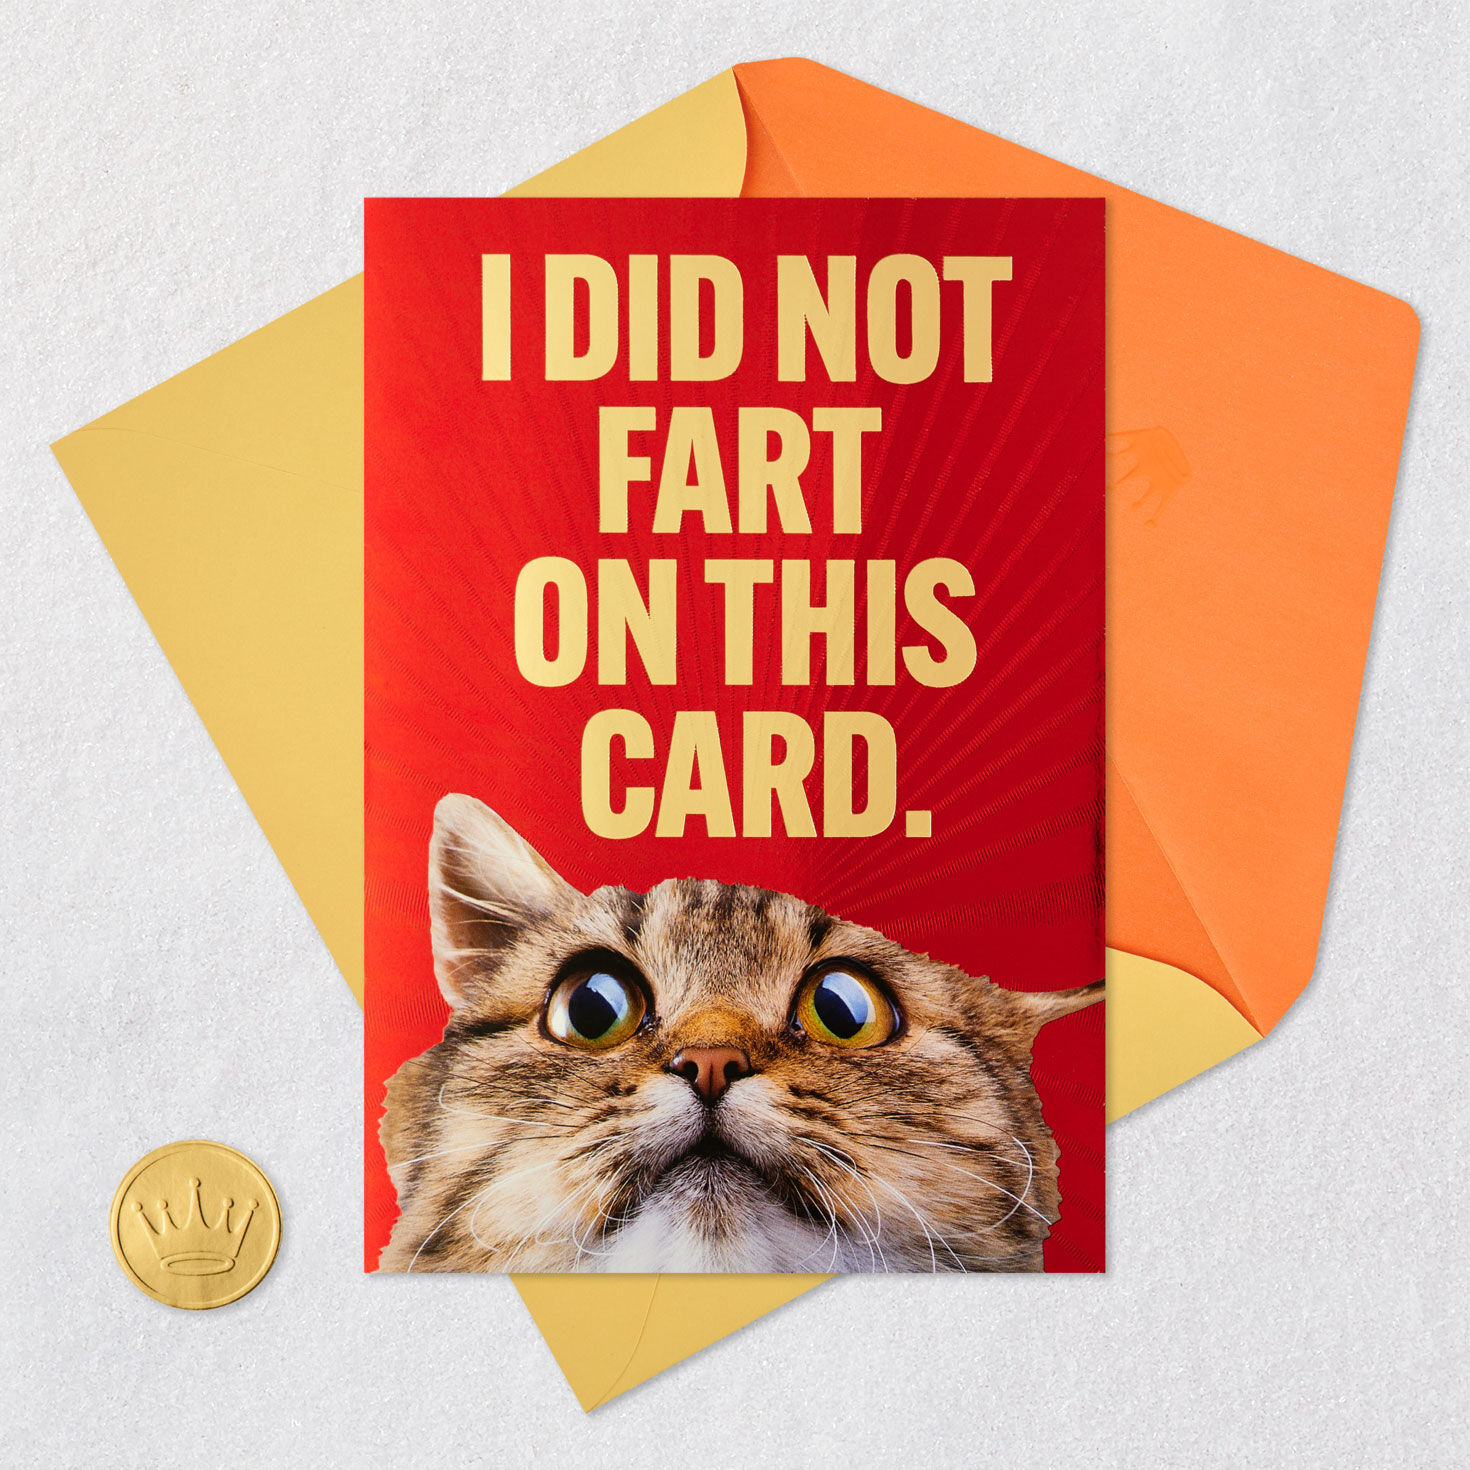 I Did Not Fart Or Did I? Funny Birthday Card for only USD 3.99 | Hallmark